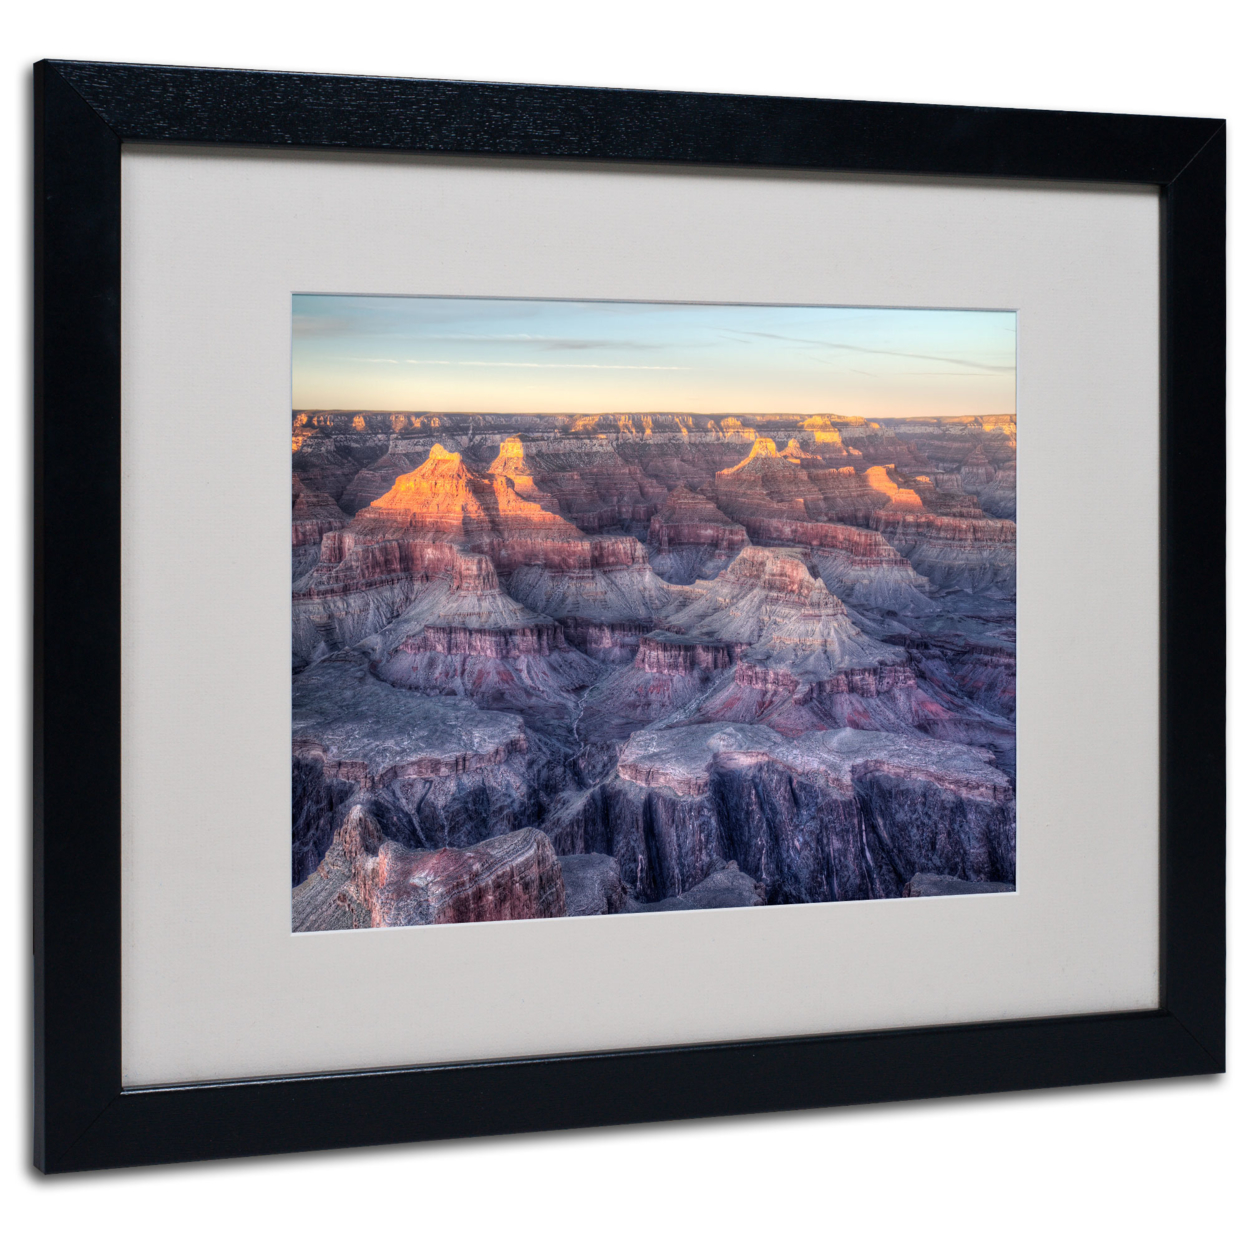 Pierre Leclerc 'Grand Canyon Sunset' Black Wooden Framed Art 18 X 22 Inches